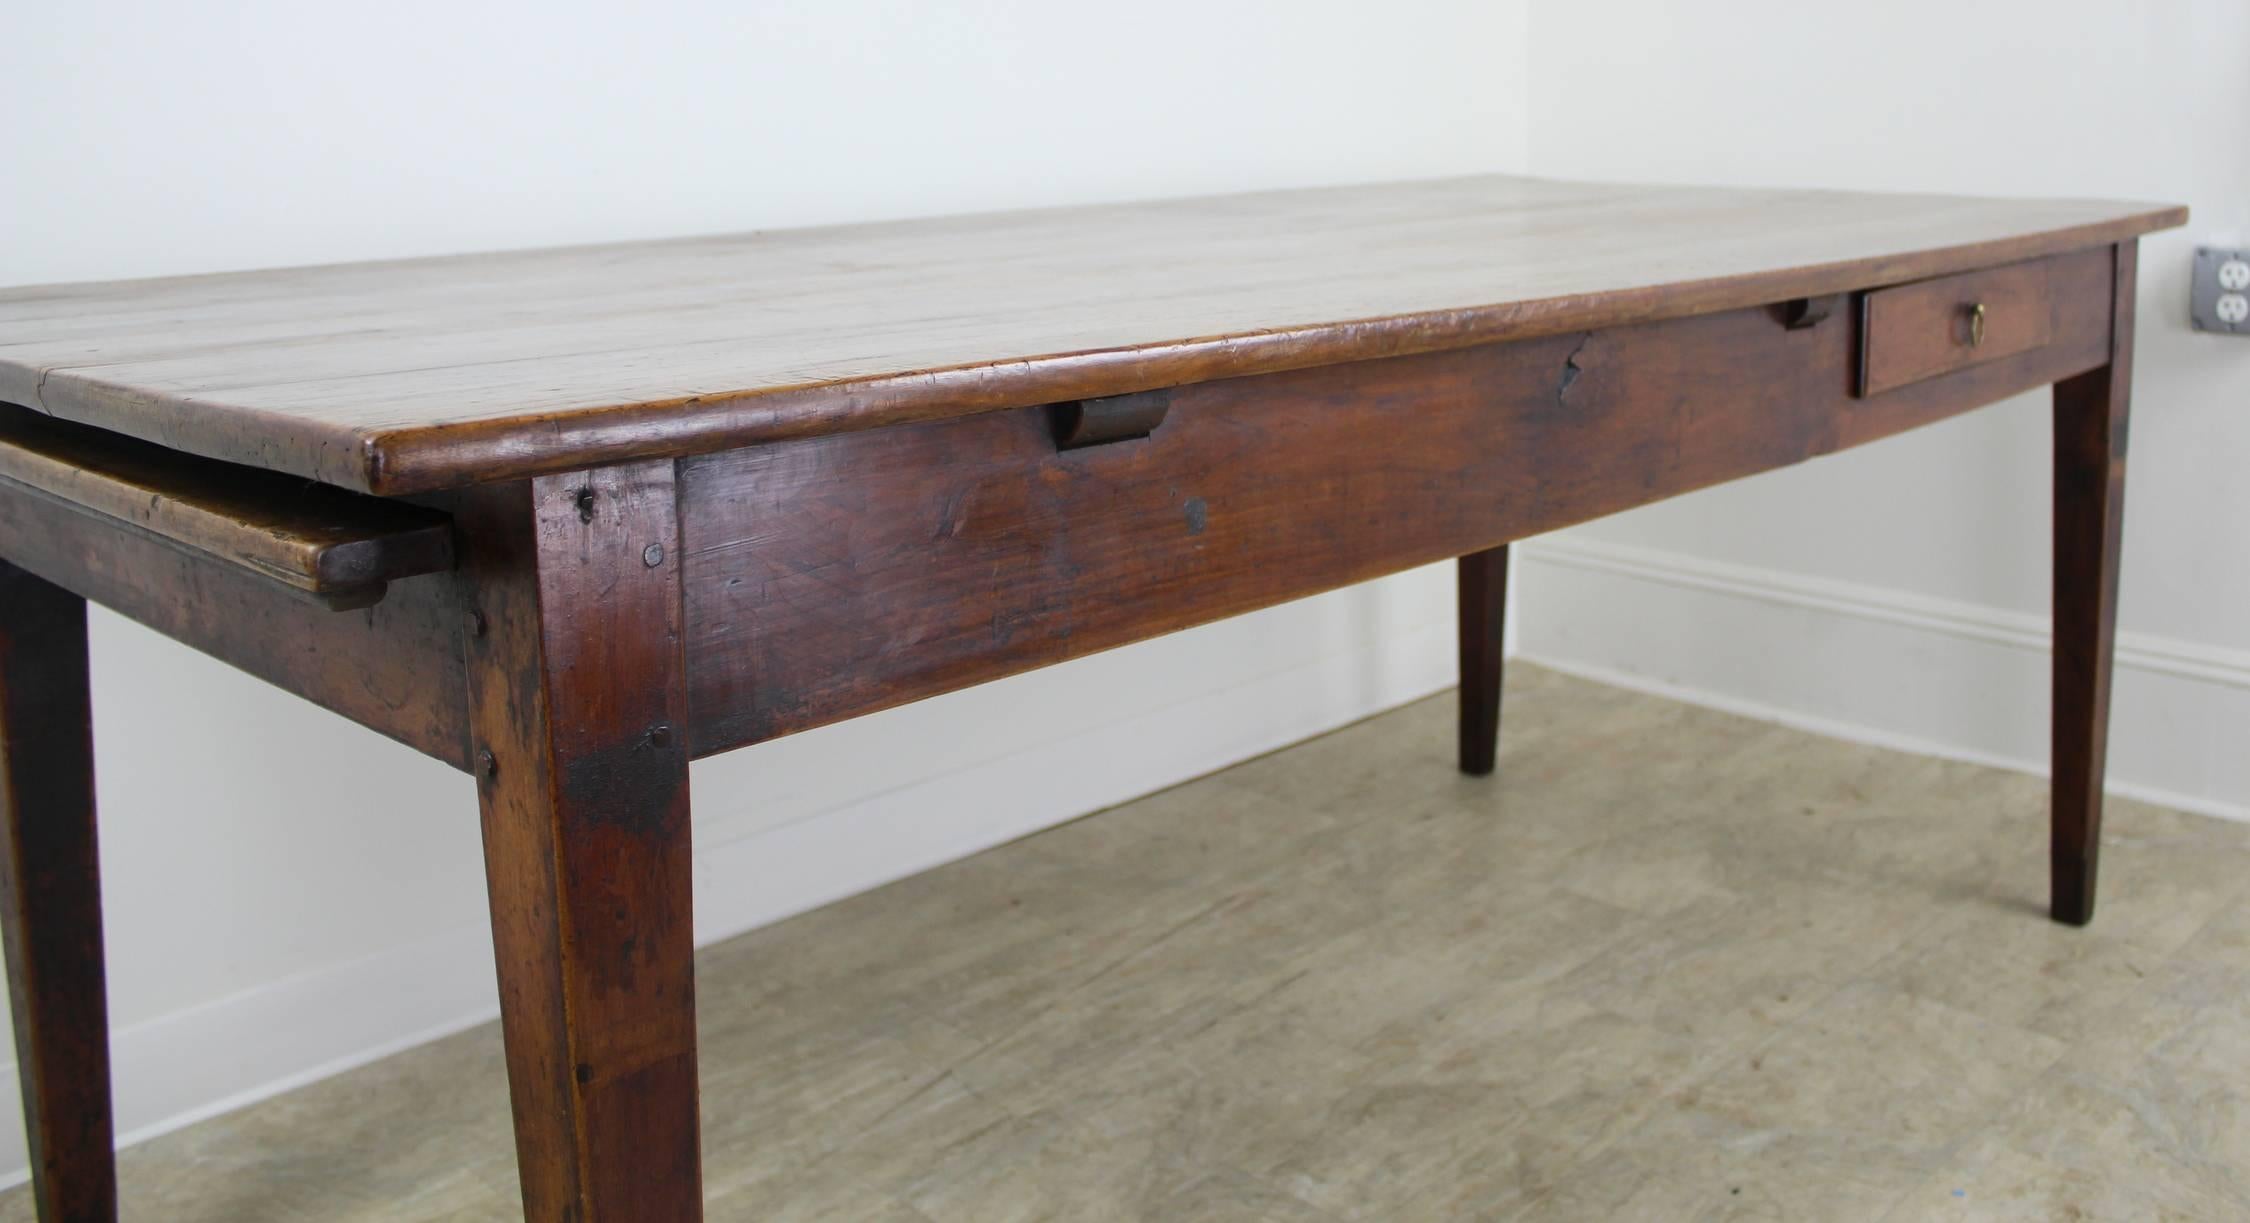 French Antique Cherry Farm Table with Bread Slide and Single Drawer